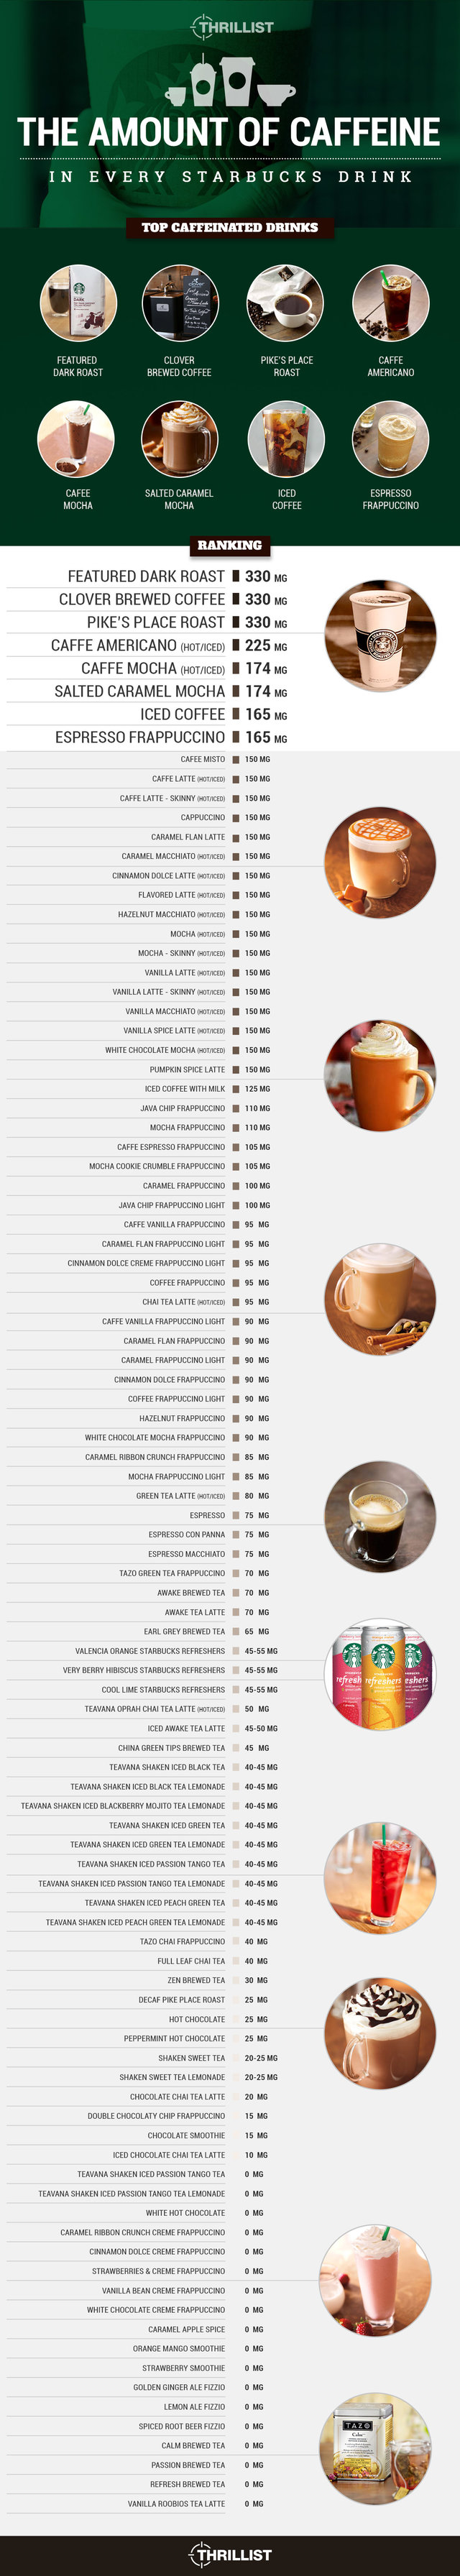 What Starbucks Drink Has The Most Caffeine In 2022? (Guide)